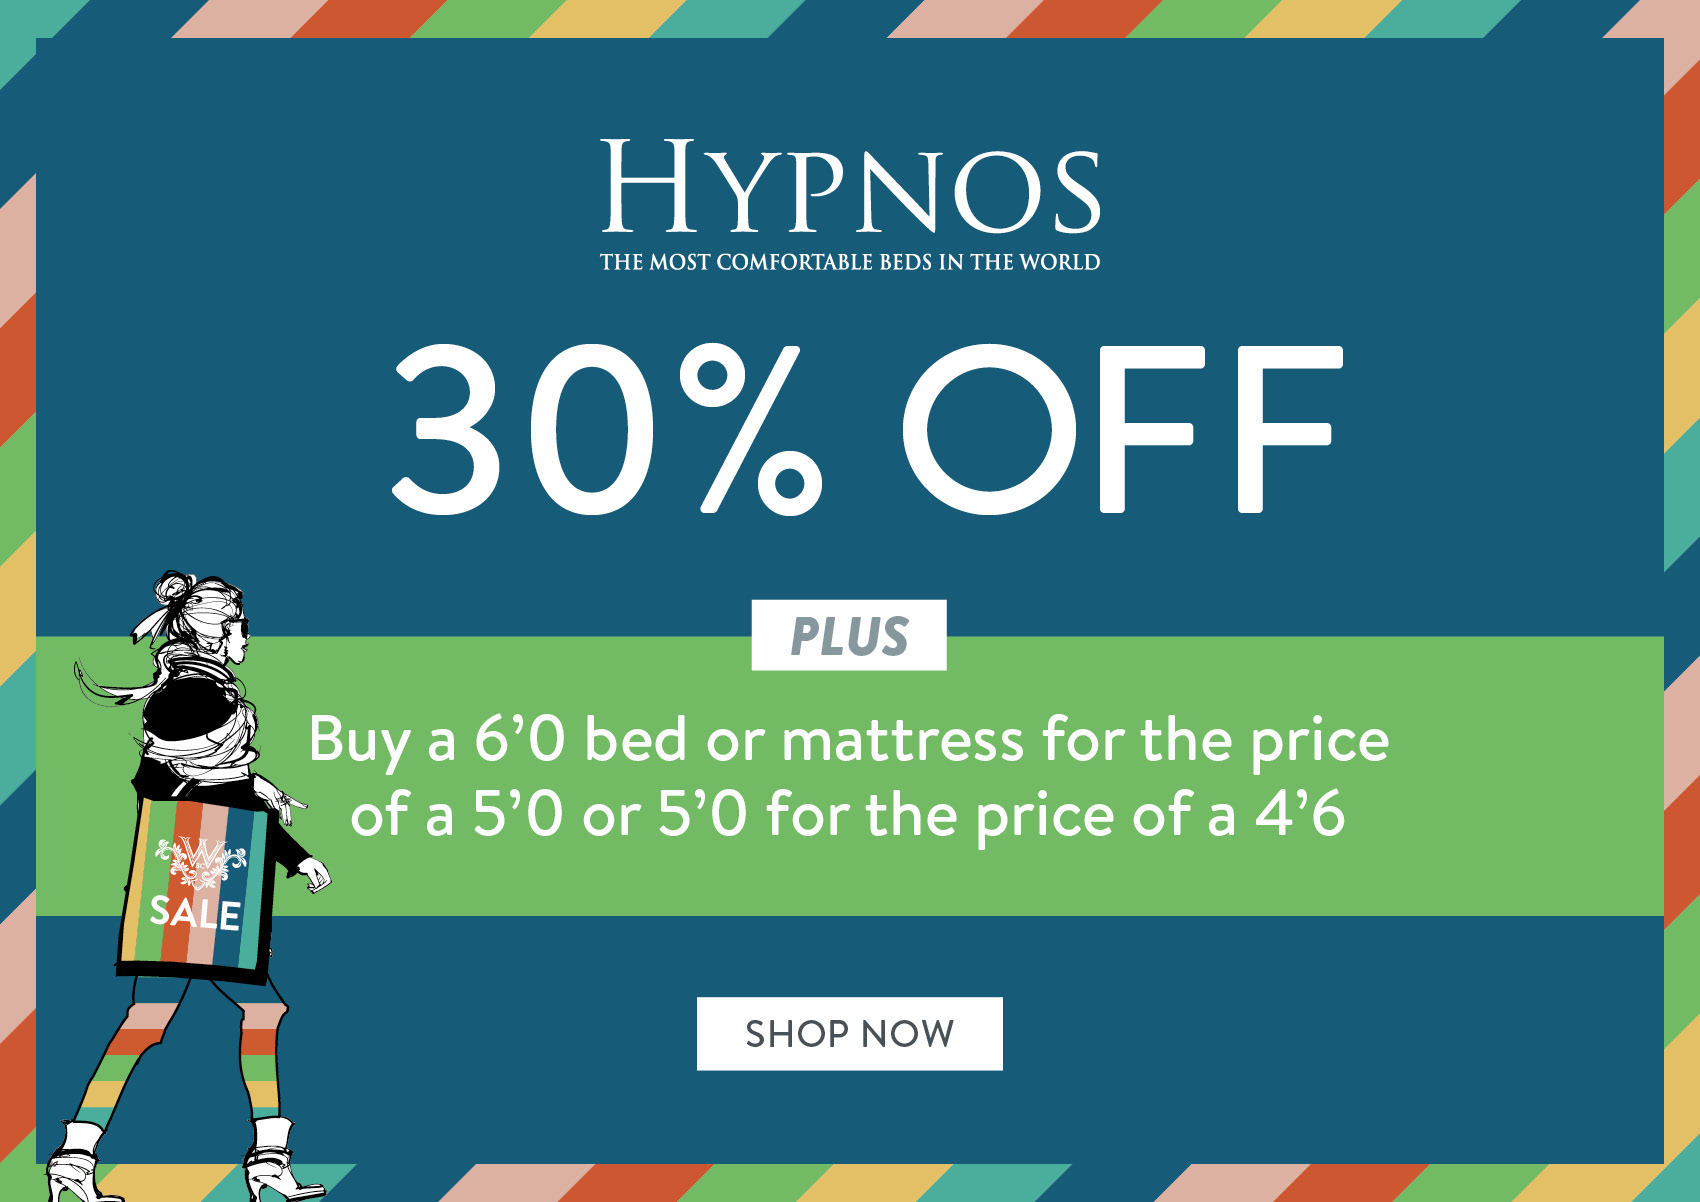 HYPNOS - The Most Comfortable Beds In The World - 30% OFF PLUS Buy a 6'0 bed or mattress for the price of a 5'0 or 5'0 for the price of a 4'6 - SHOP NOW